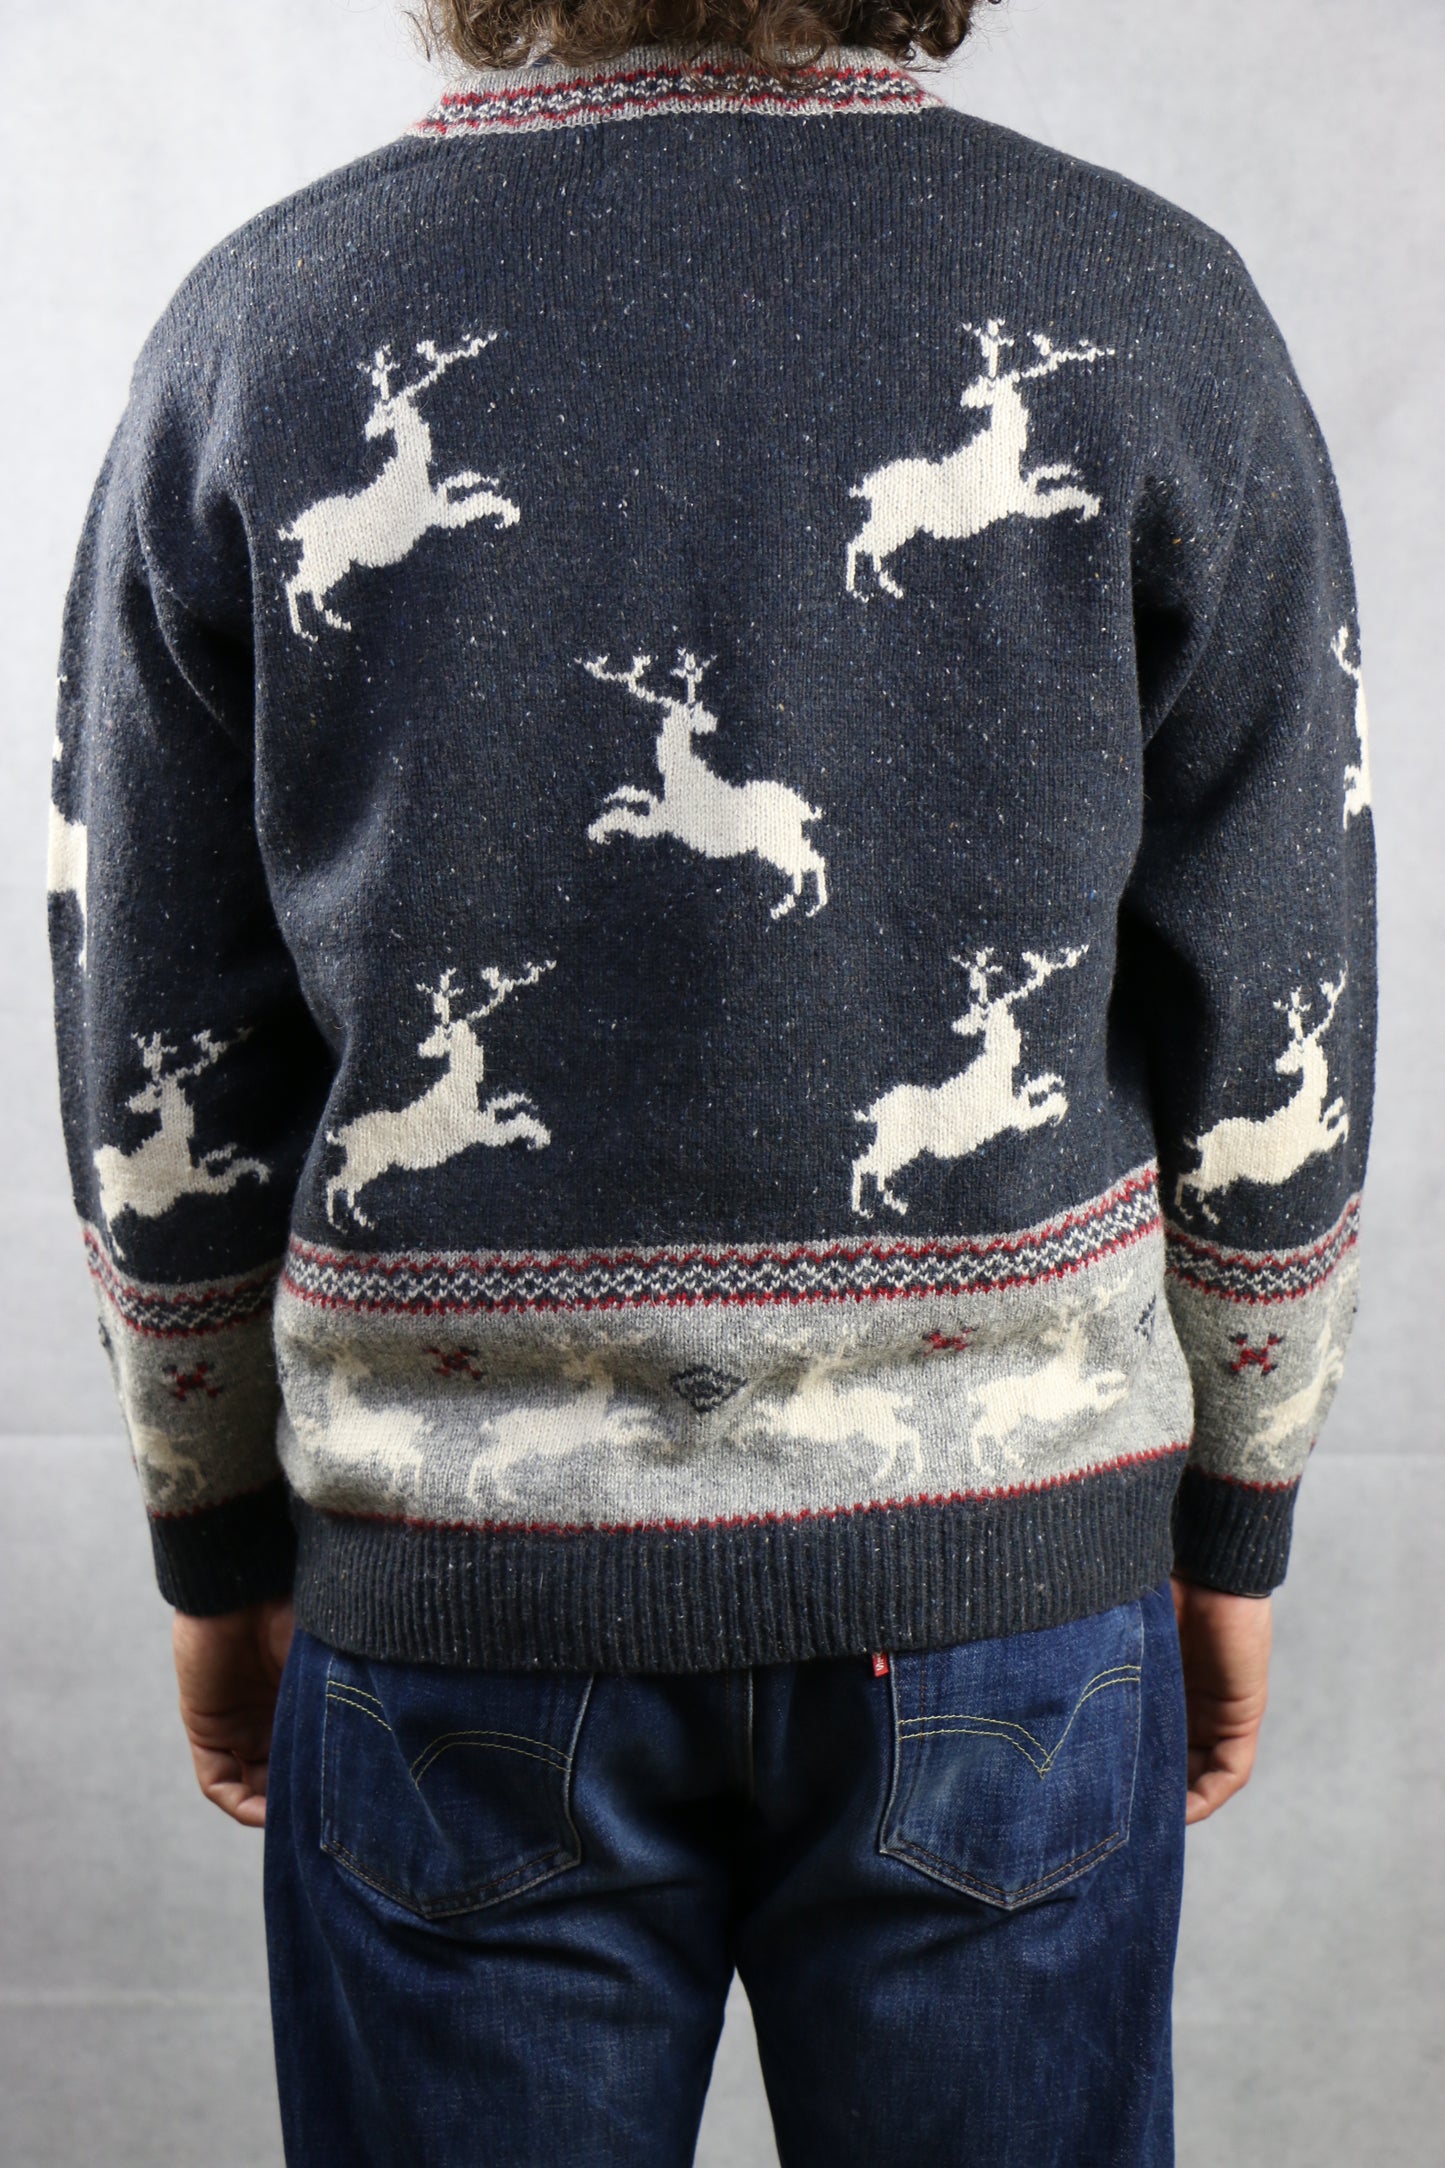 Woolrich Sweater With Reindeer - vintage clothing clochard92.com